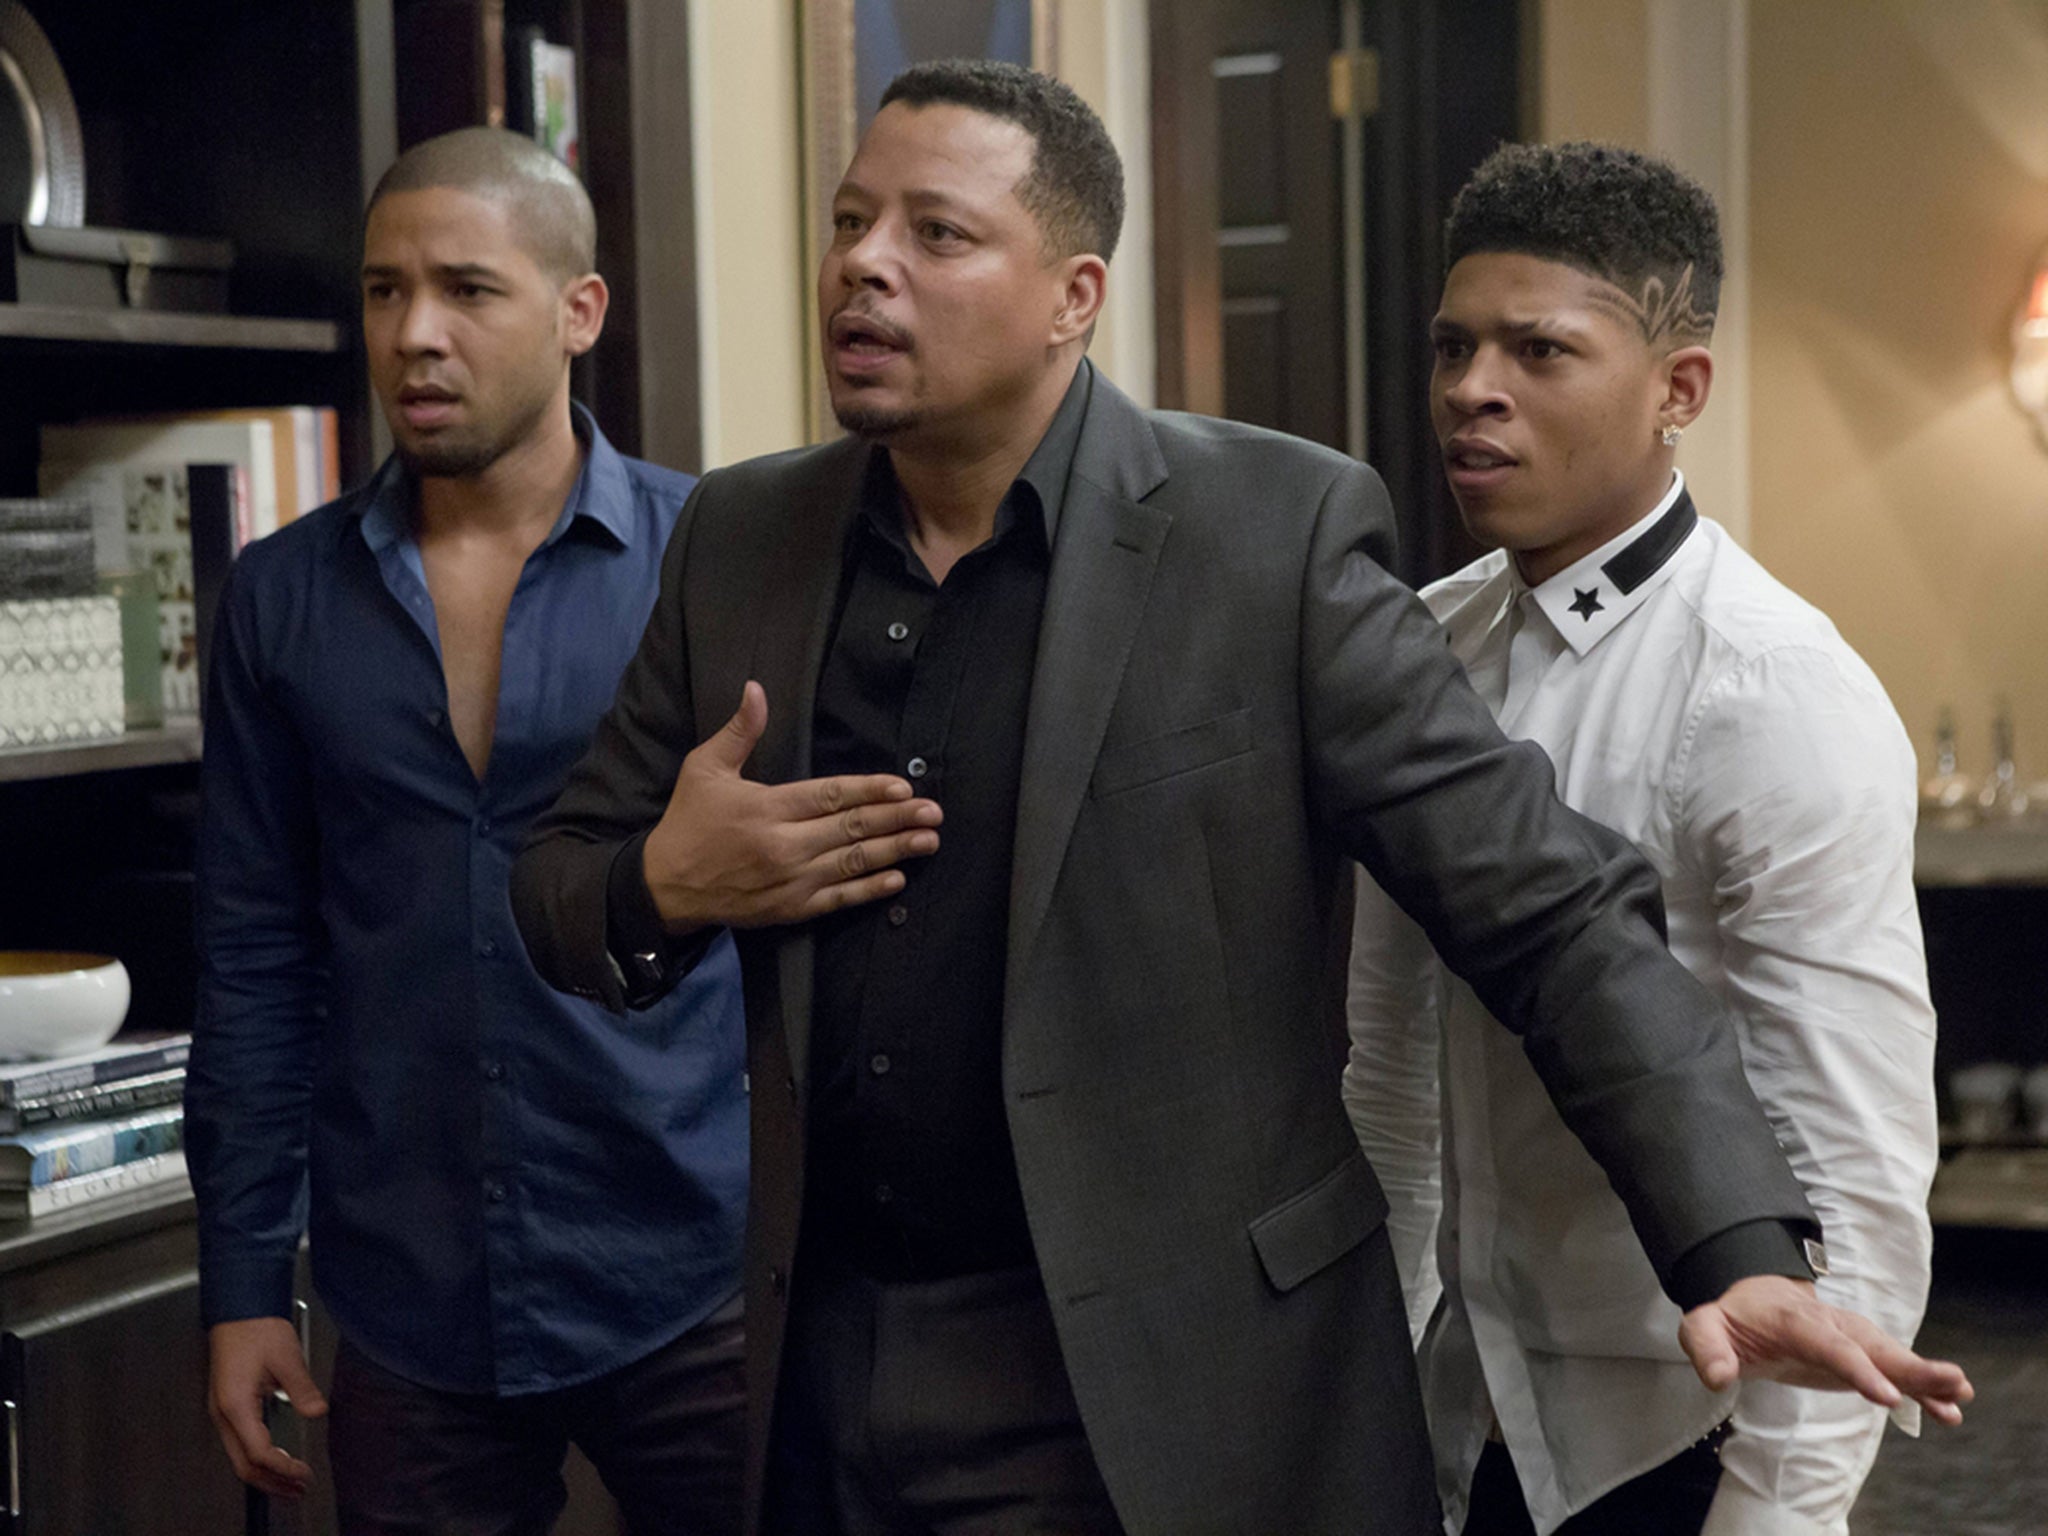 ‘Empire’ – starring Terrence Howard as Lucious Lyon – has been an unexpected TV hit